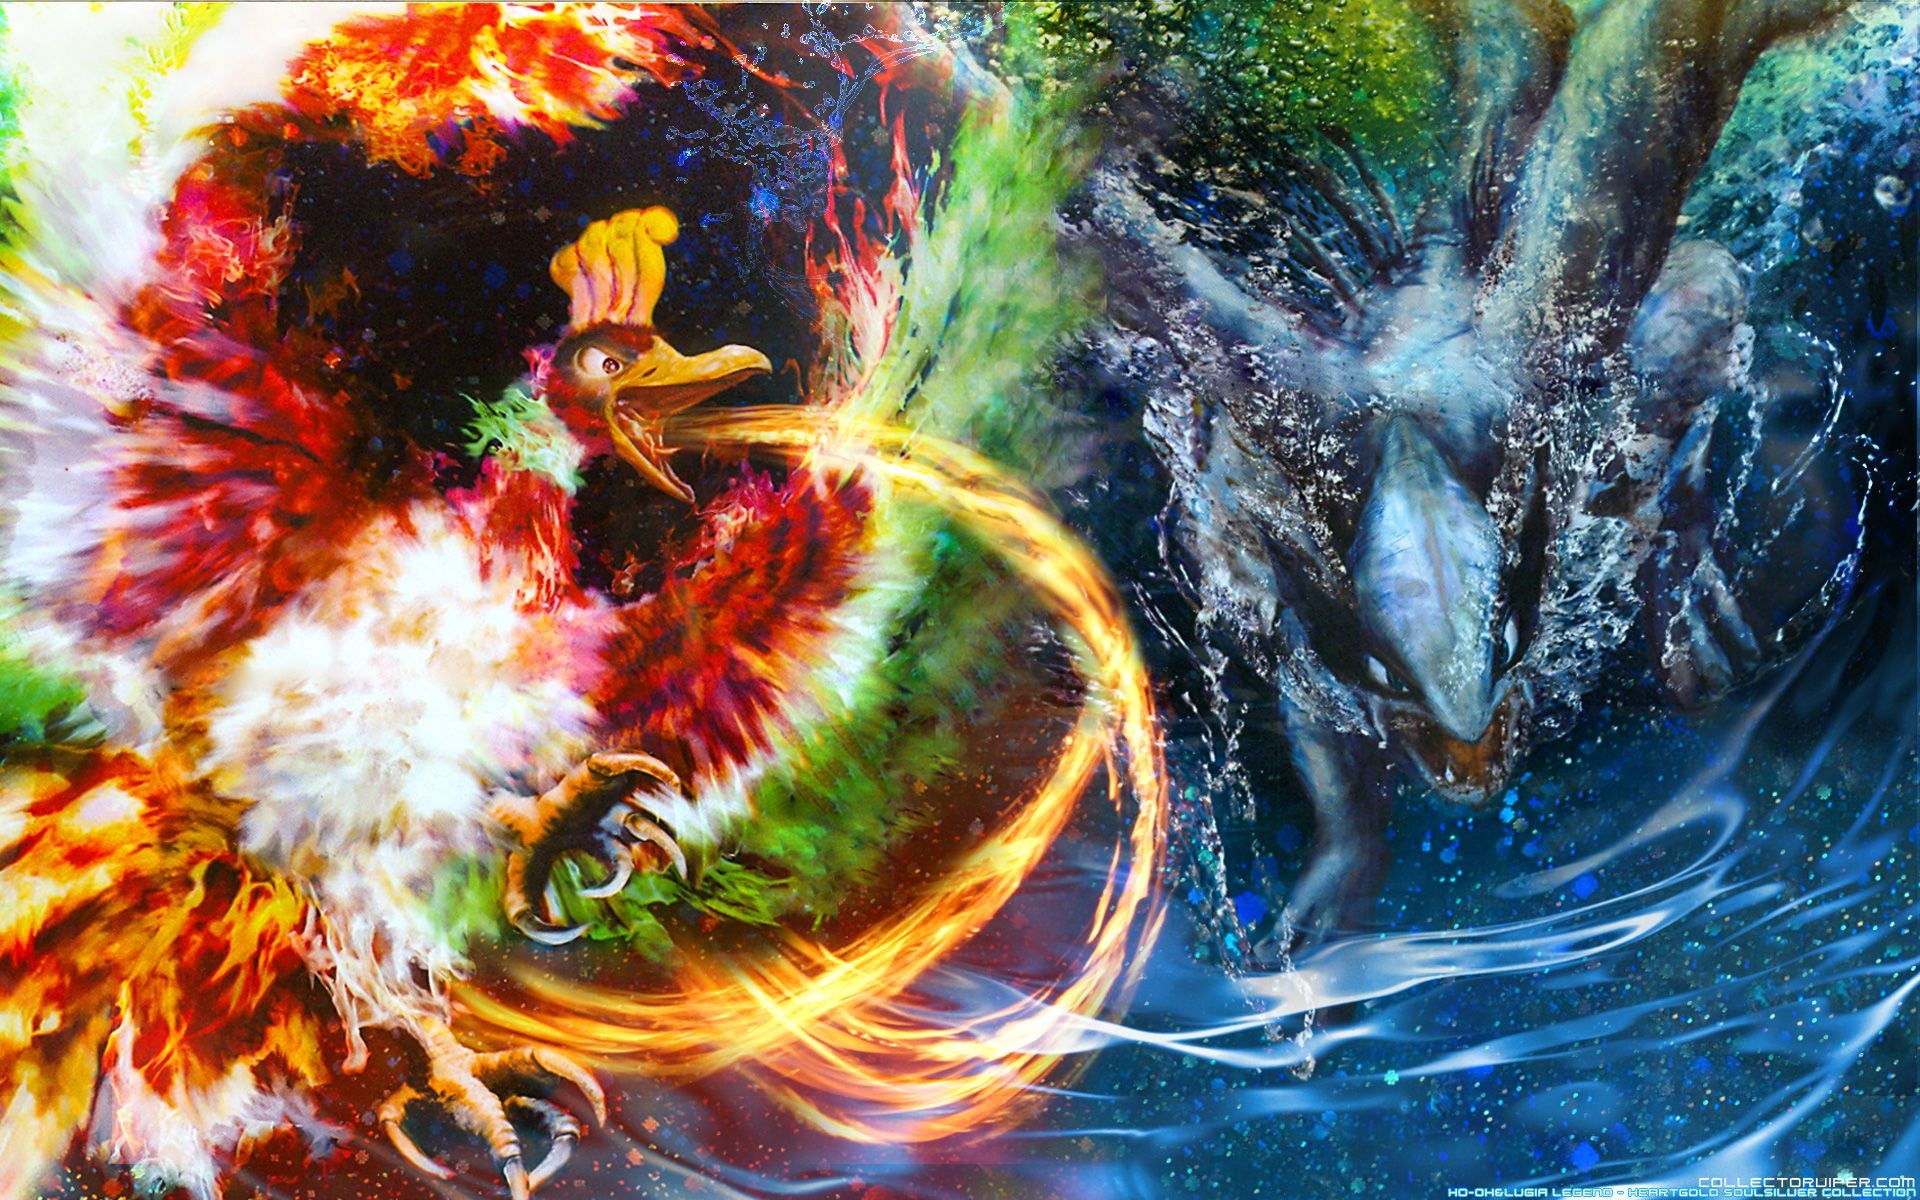 1920x1200 epic pokemon pics today, so how about an epic pokemon wallpaper off .